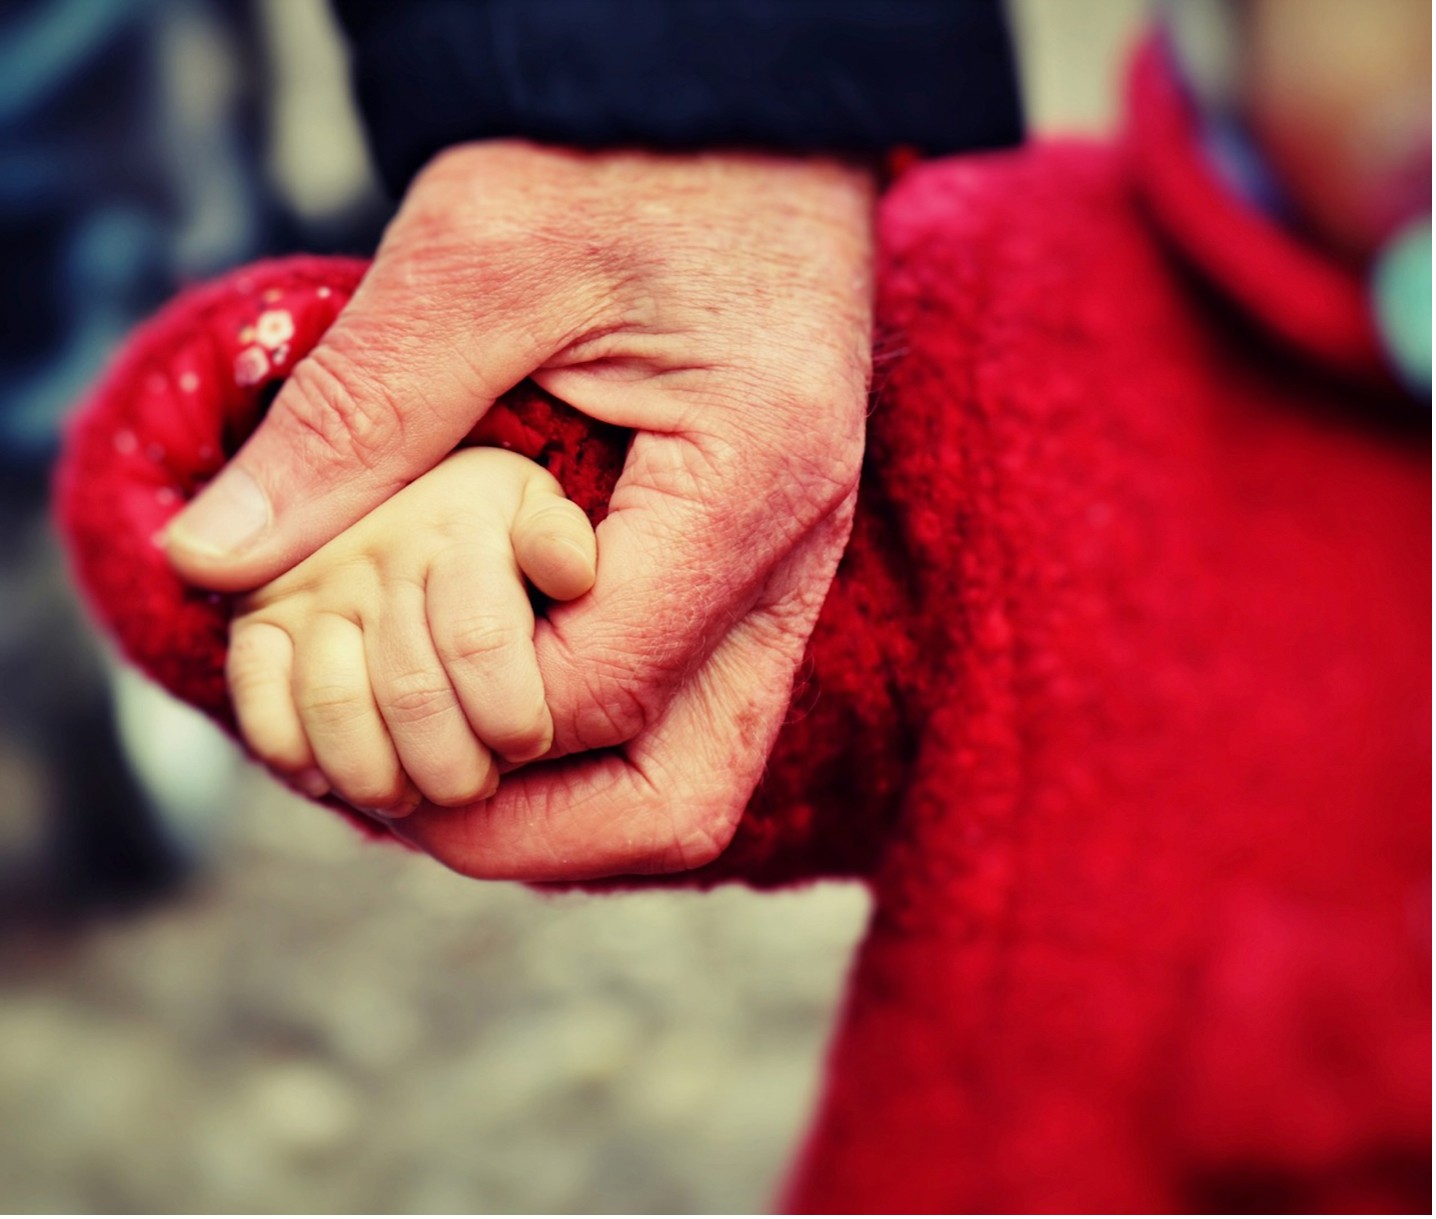 An elderly person's hand holds a small child's hand 